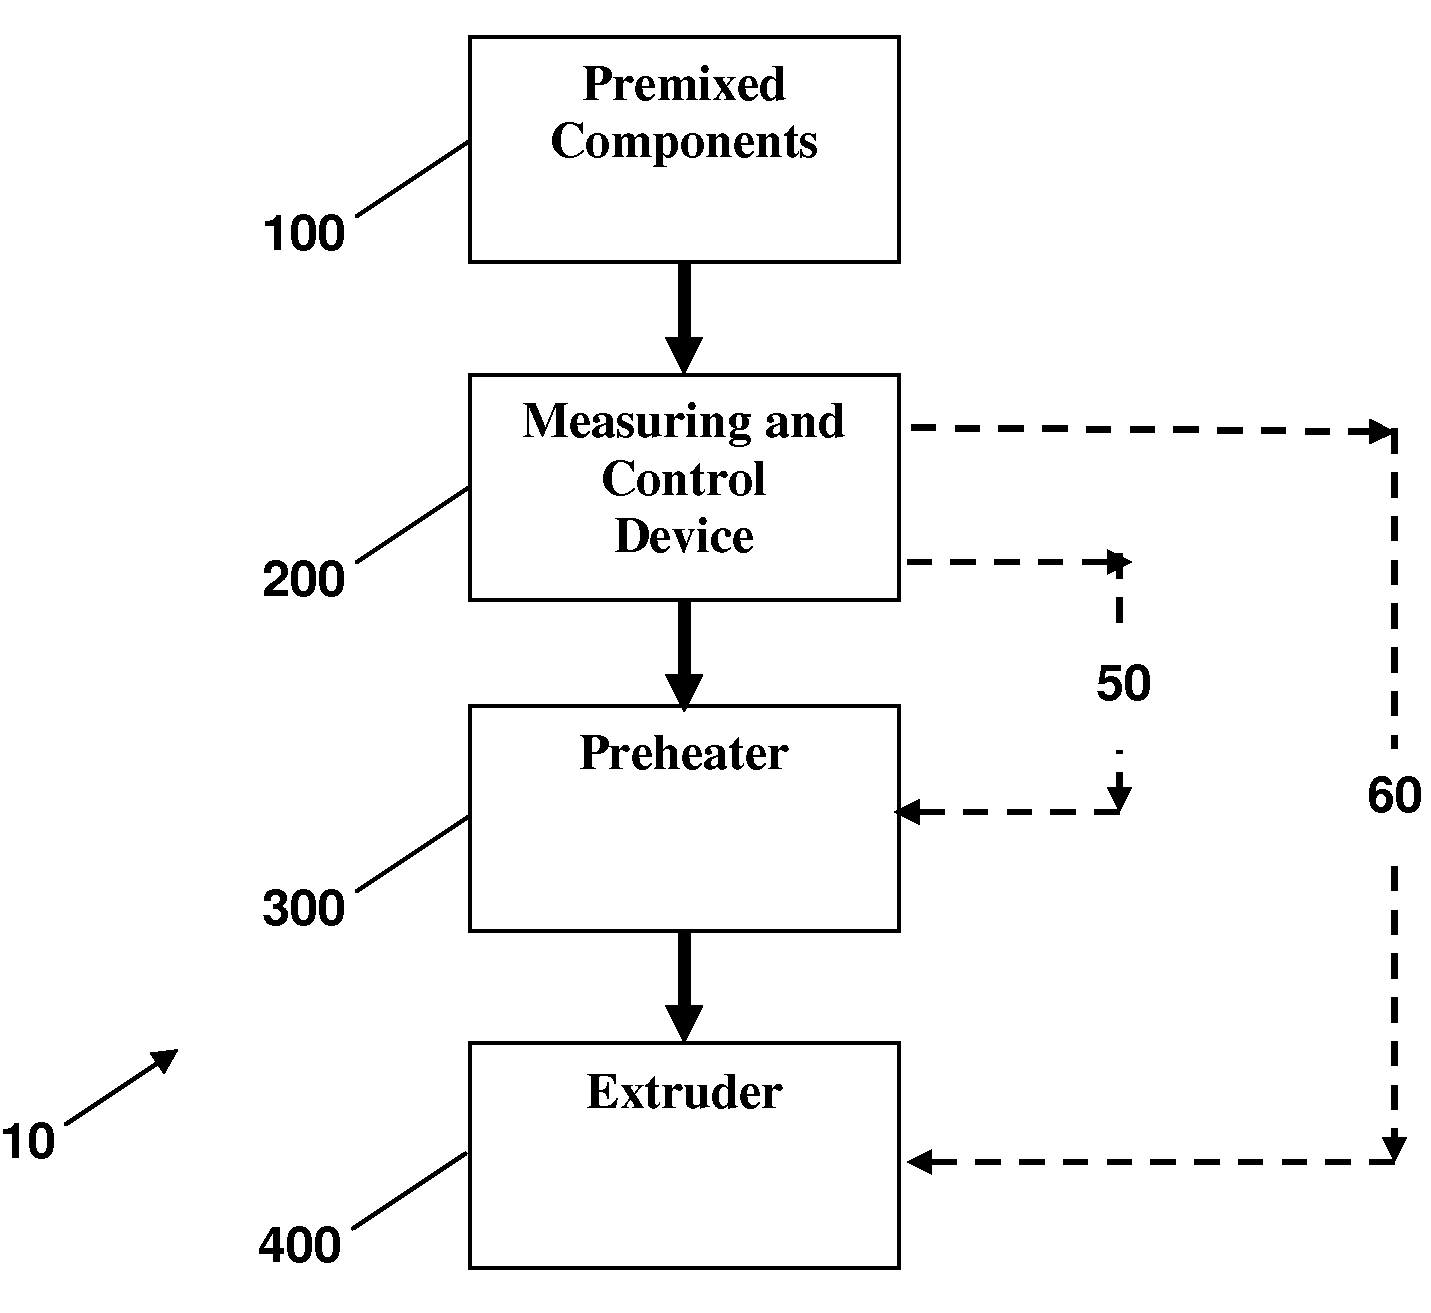 System and method for manufacturing composite materials having substantially uniform properties